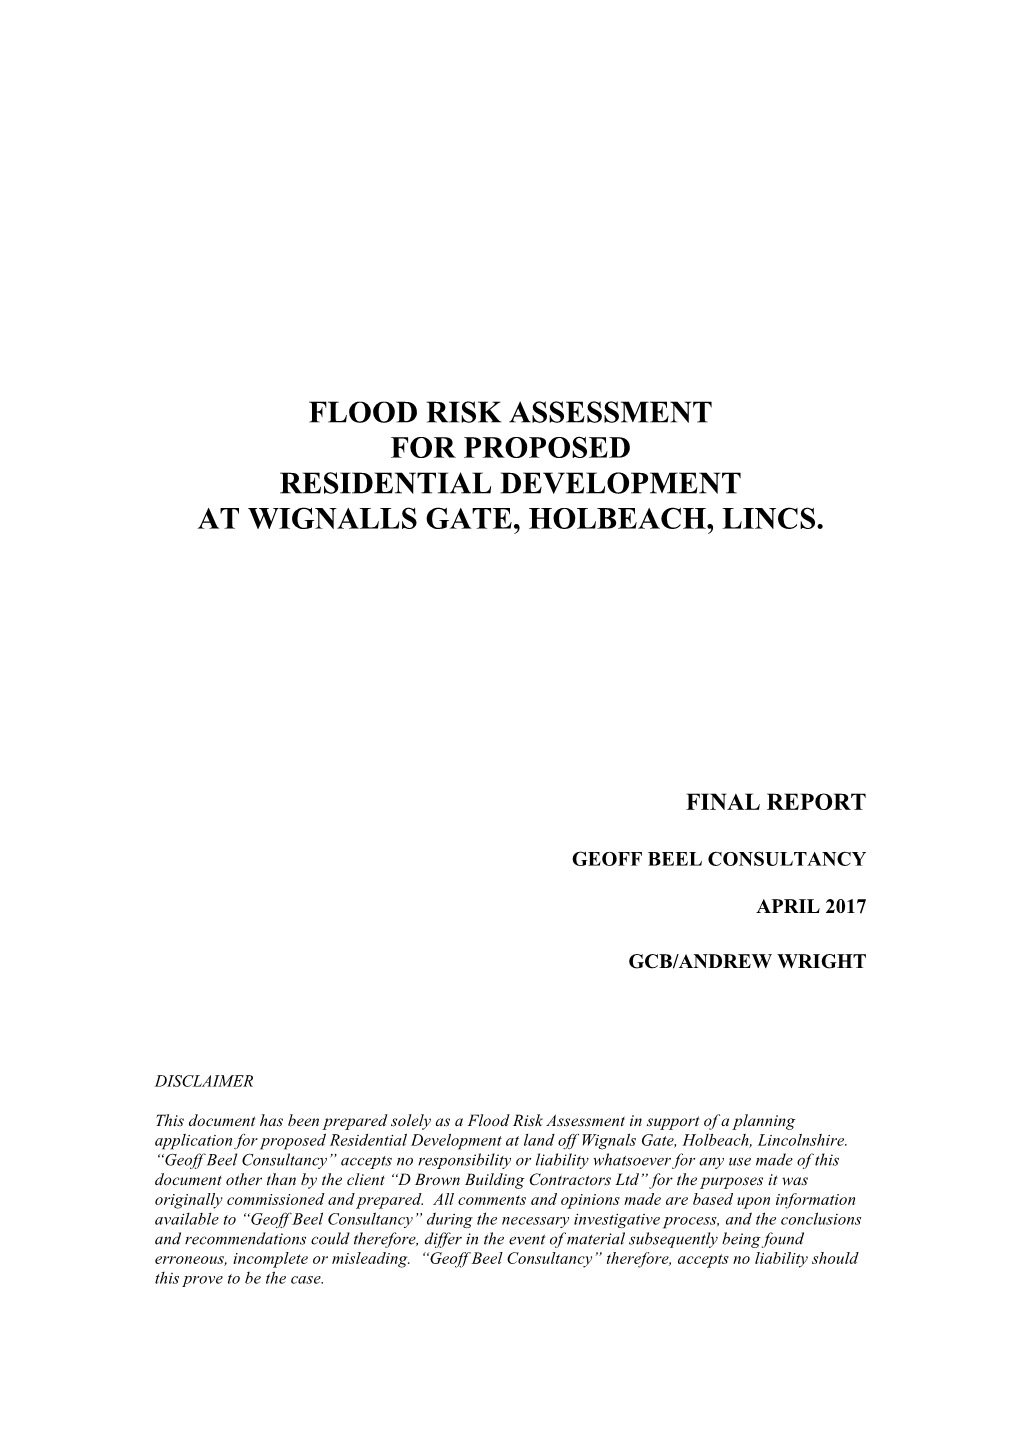 Flood Risk Assessment in Support of a Planning Application for Proposed Residential Development at Land Off Wignals Gate, Holbeach, Lincolnshire